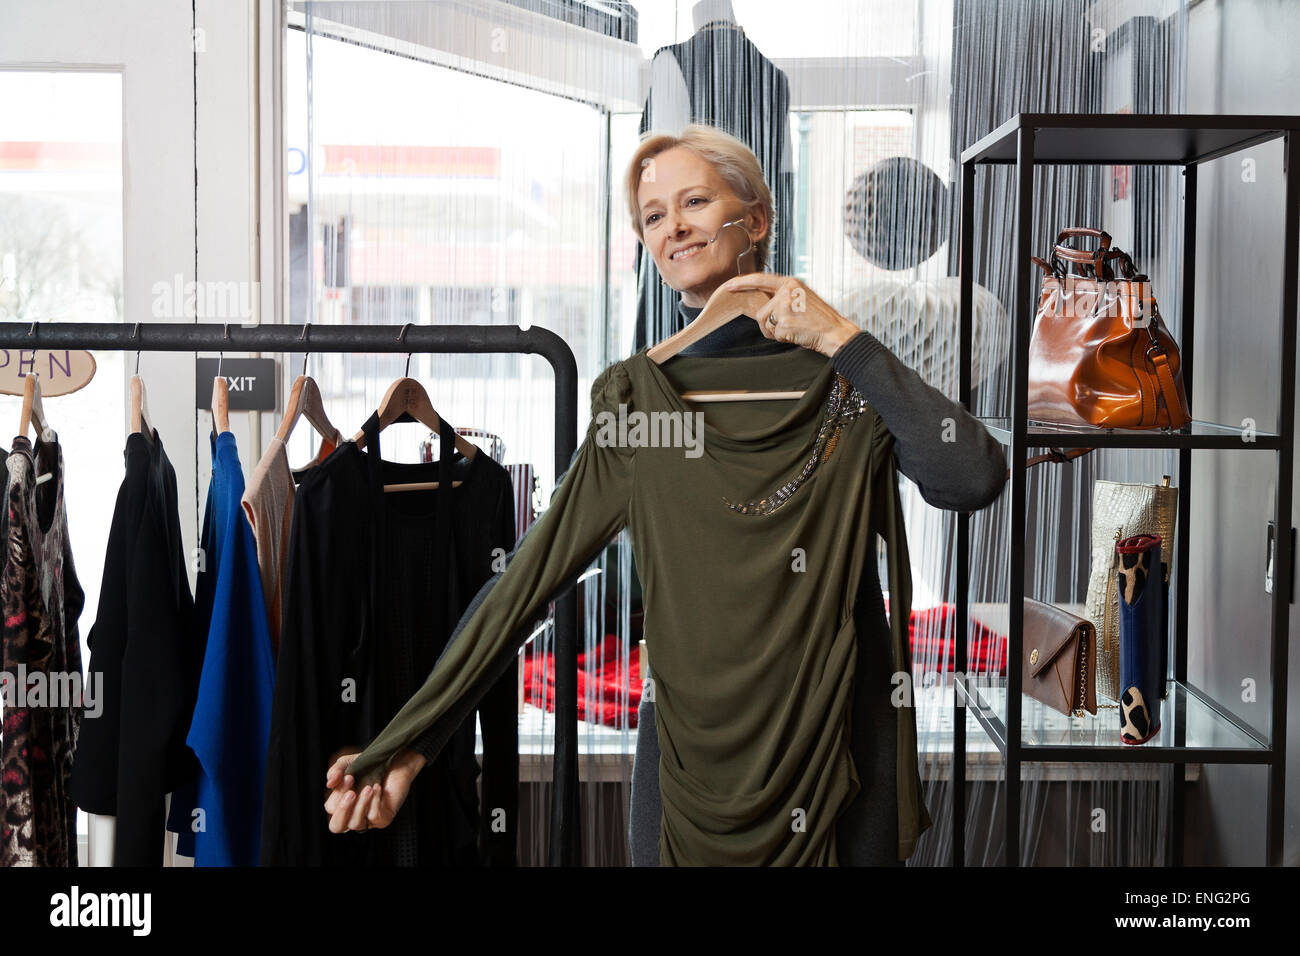 Older Caucasian woman shopping in clothing store Stock Photo